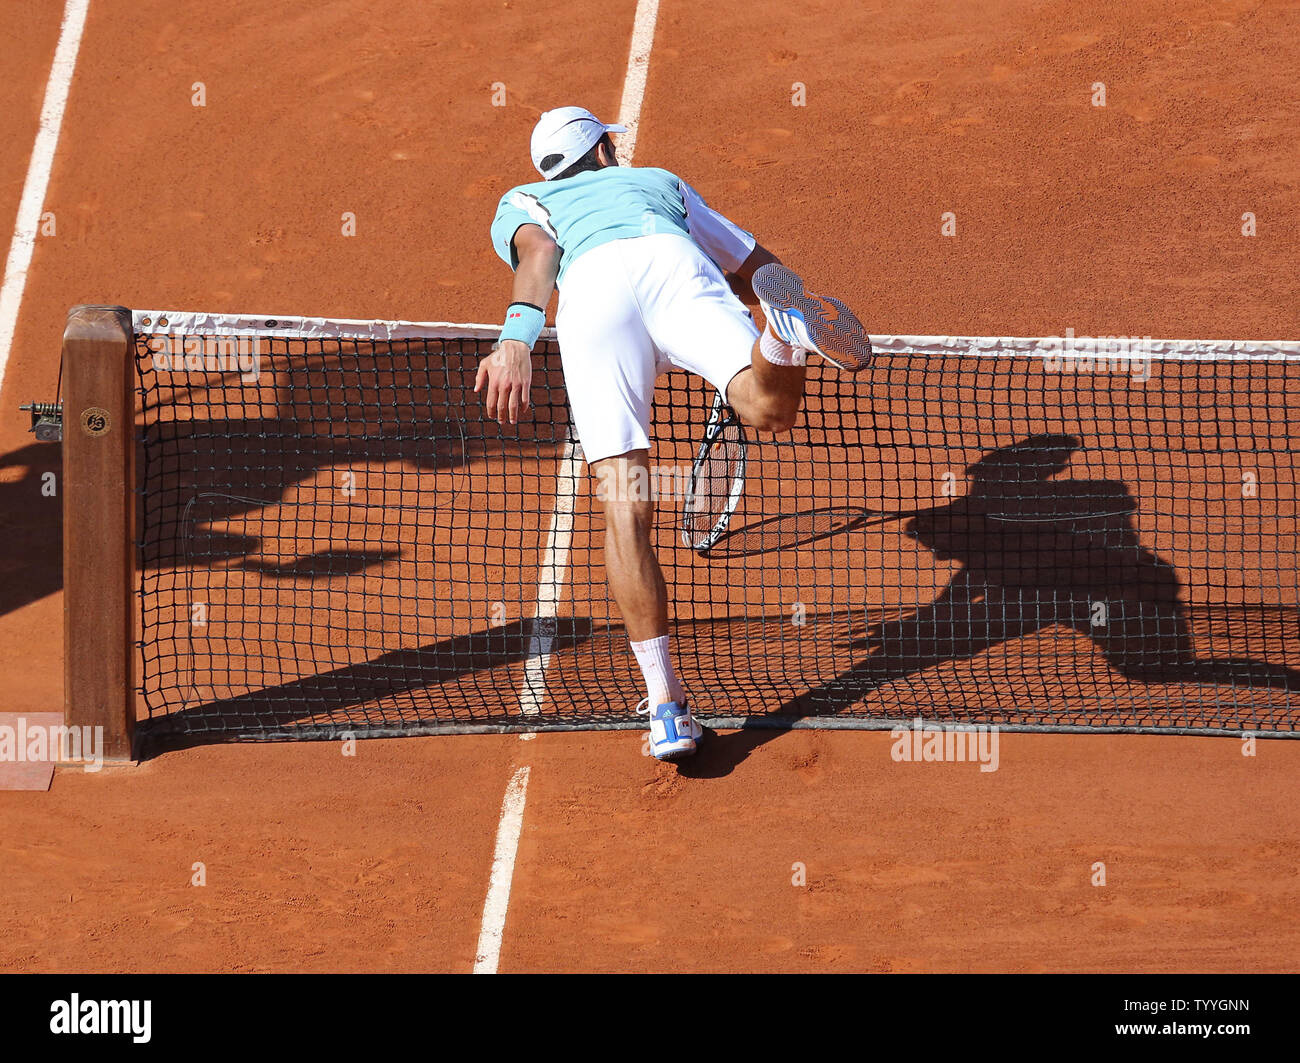 Serbian Novak Djokovic runs into the net after hitting a shot during his French  Open men's semifinal match against Spaniard Rafael Nadal at Roland Garros  in Paris on June 7, 2013. Nadal